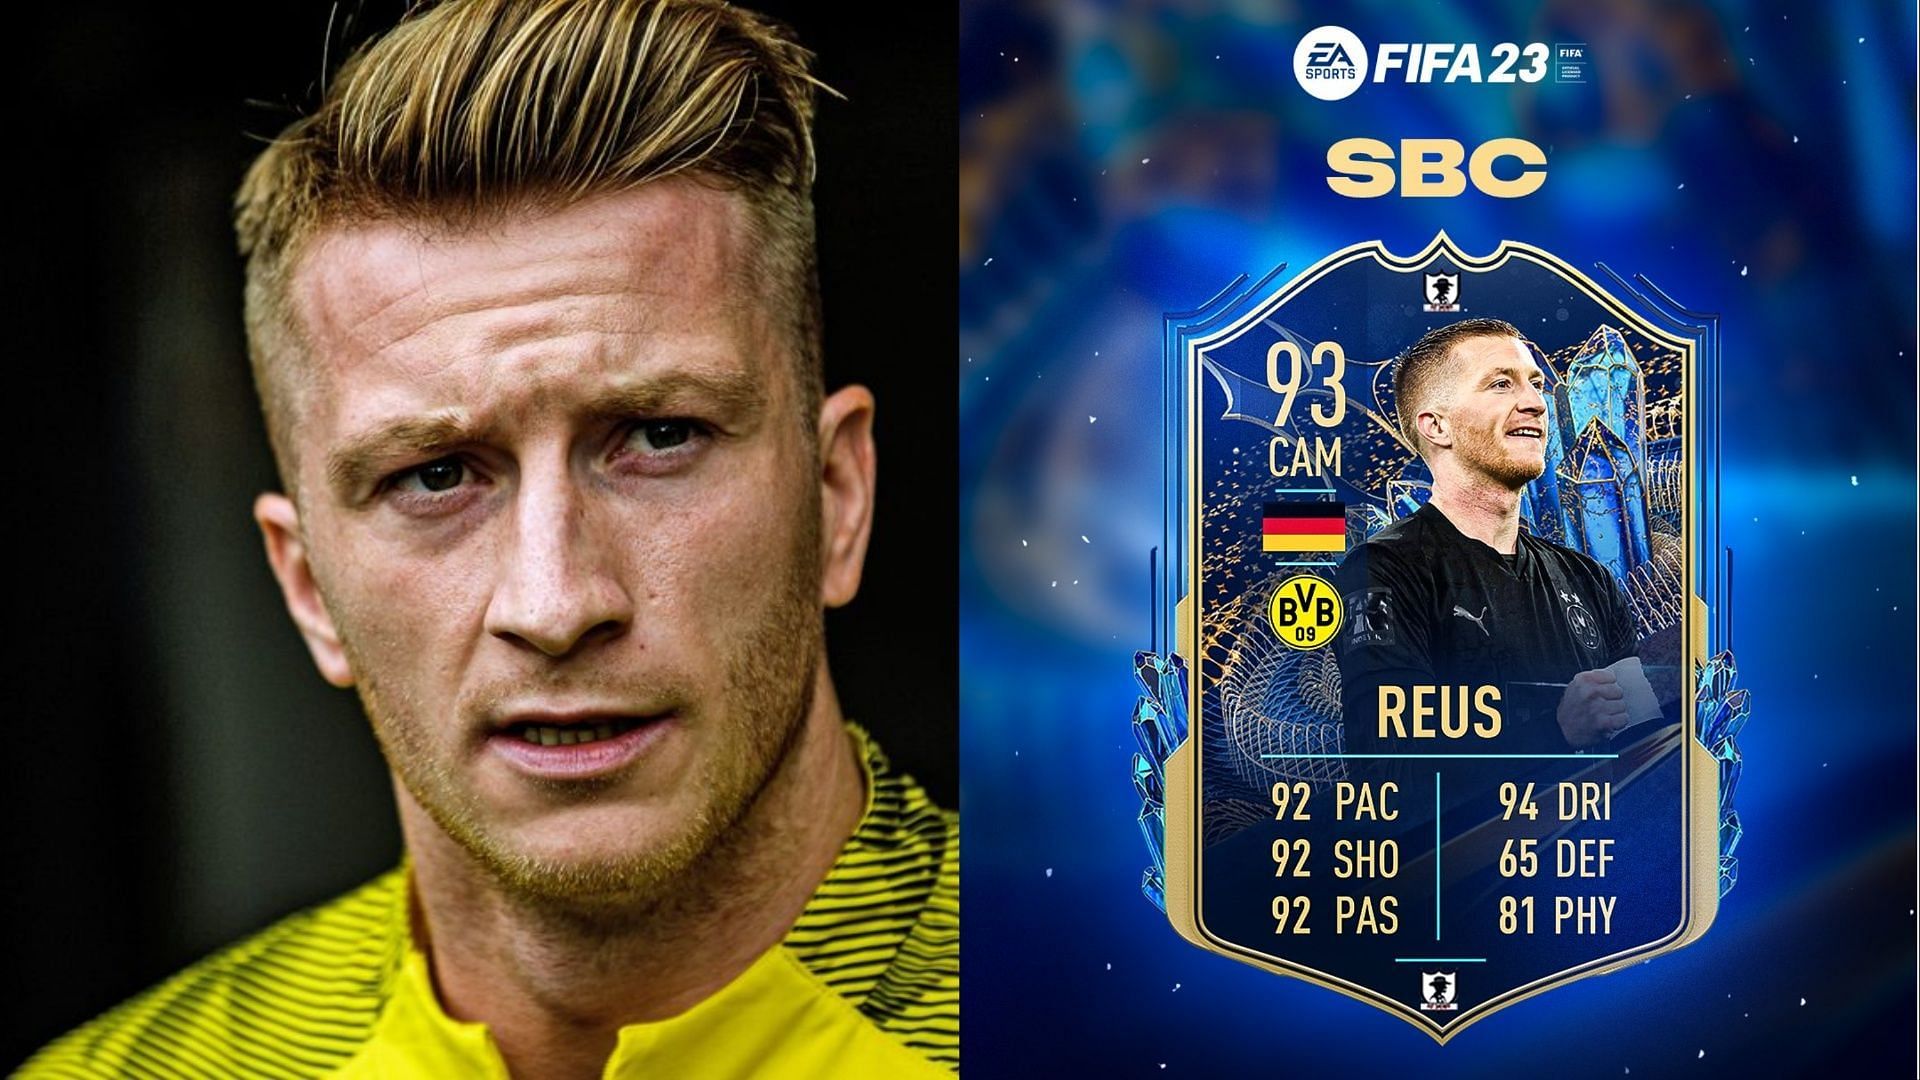 The Marco Reus Bundesliga TOTS SBC could be highly popular among FIFA 23 players (Images via Getty, Twitter/FUT Sheriff)